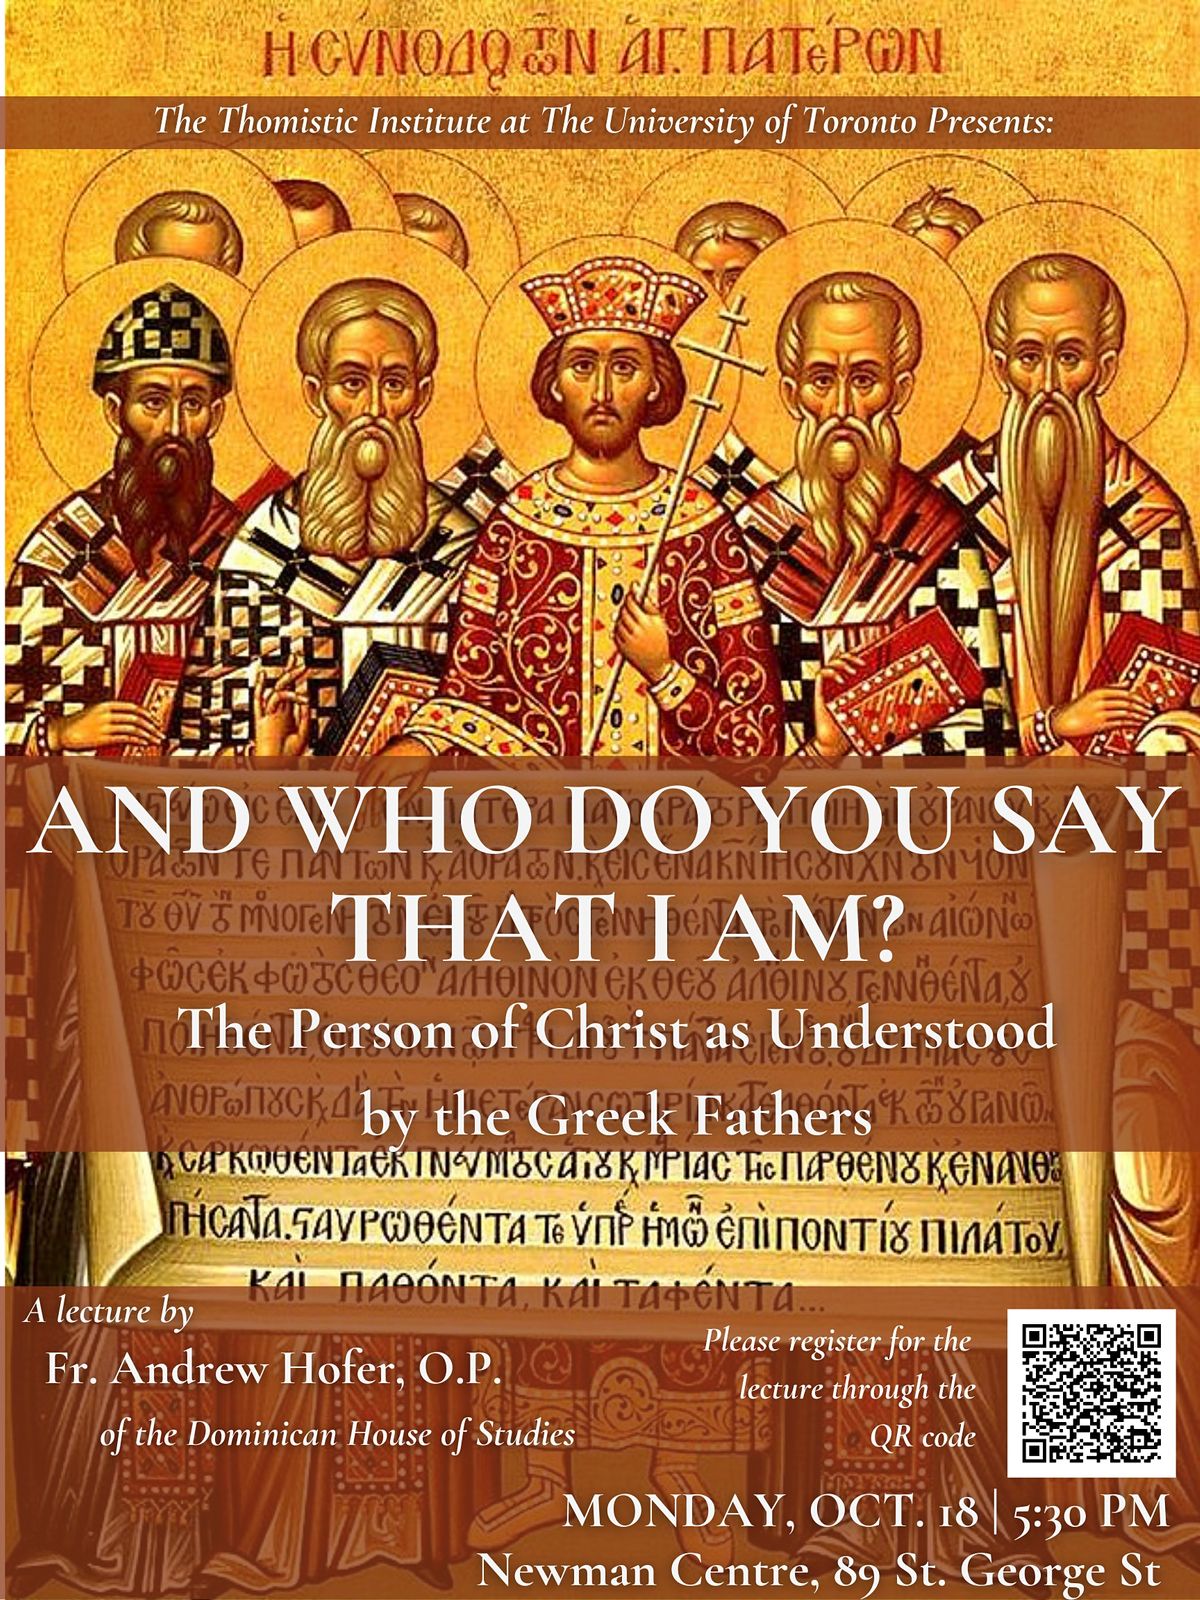 "And Who Do You Say That I Am:" Christ as Understood by the Greek Fathers